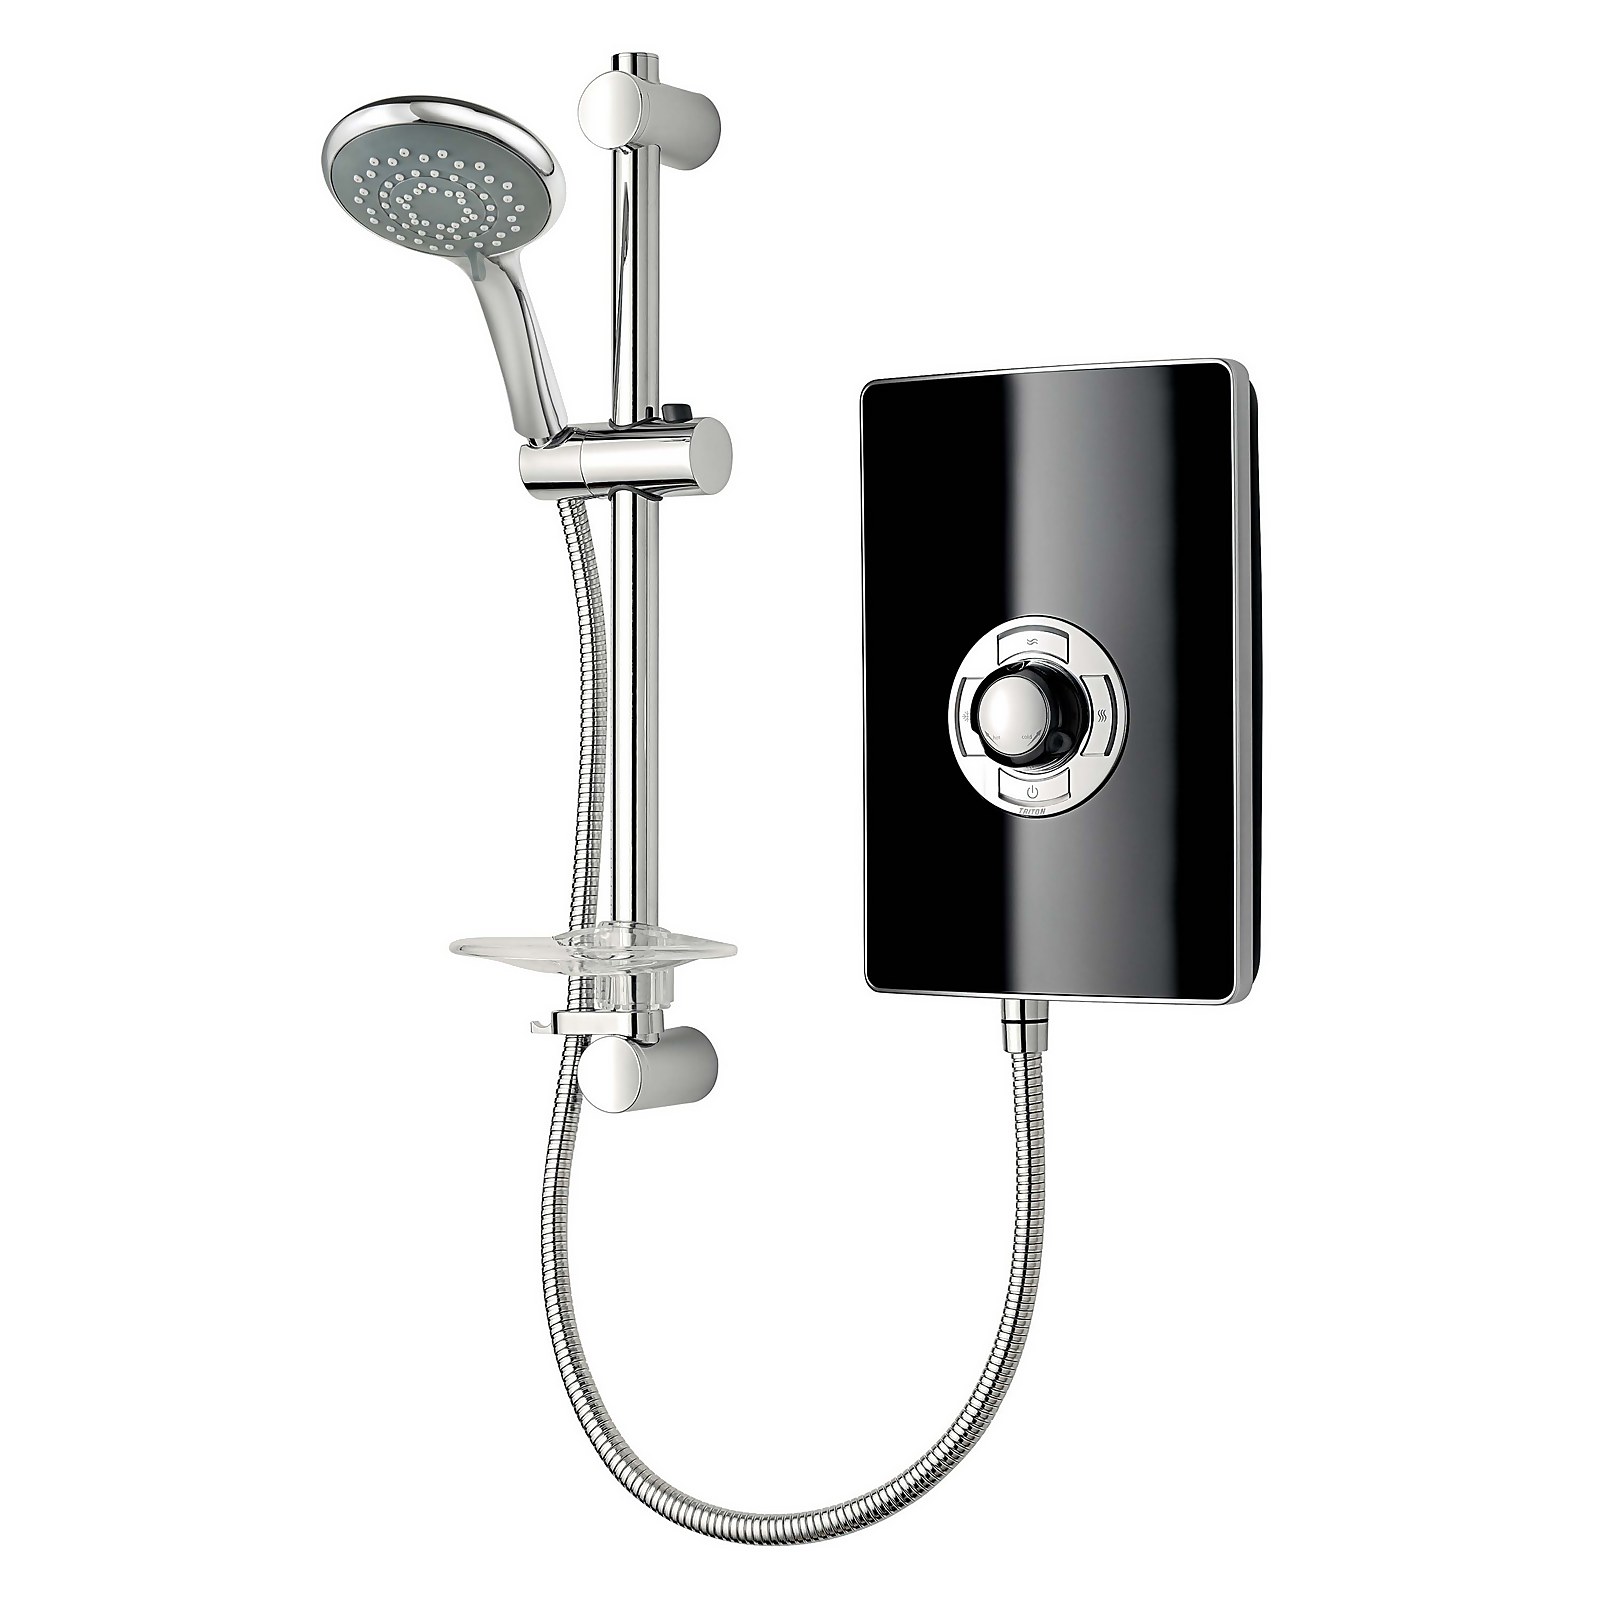 Triton Collection 8.5kW Electric Shower - Gloss Black